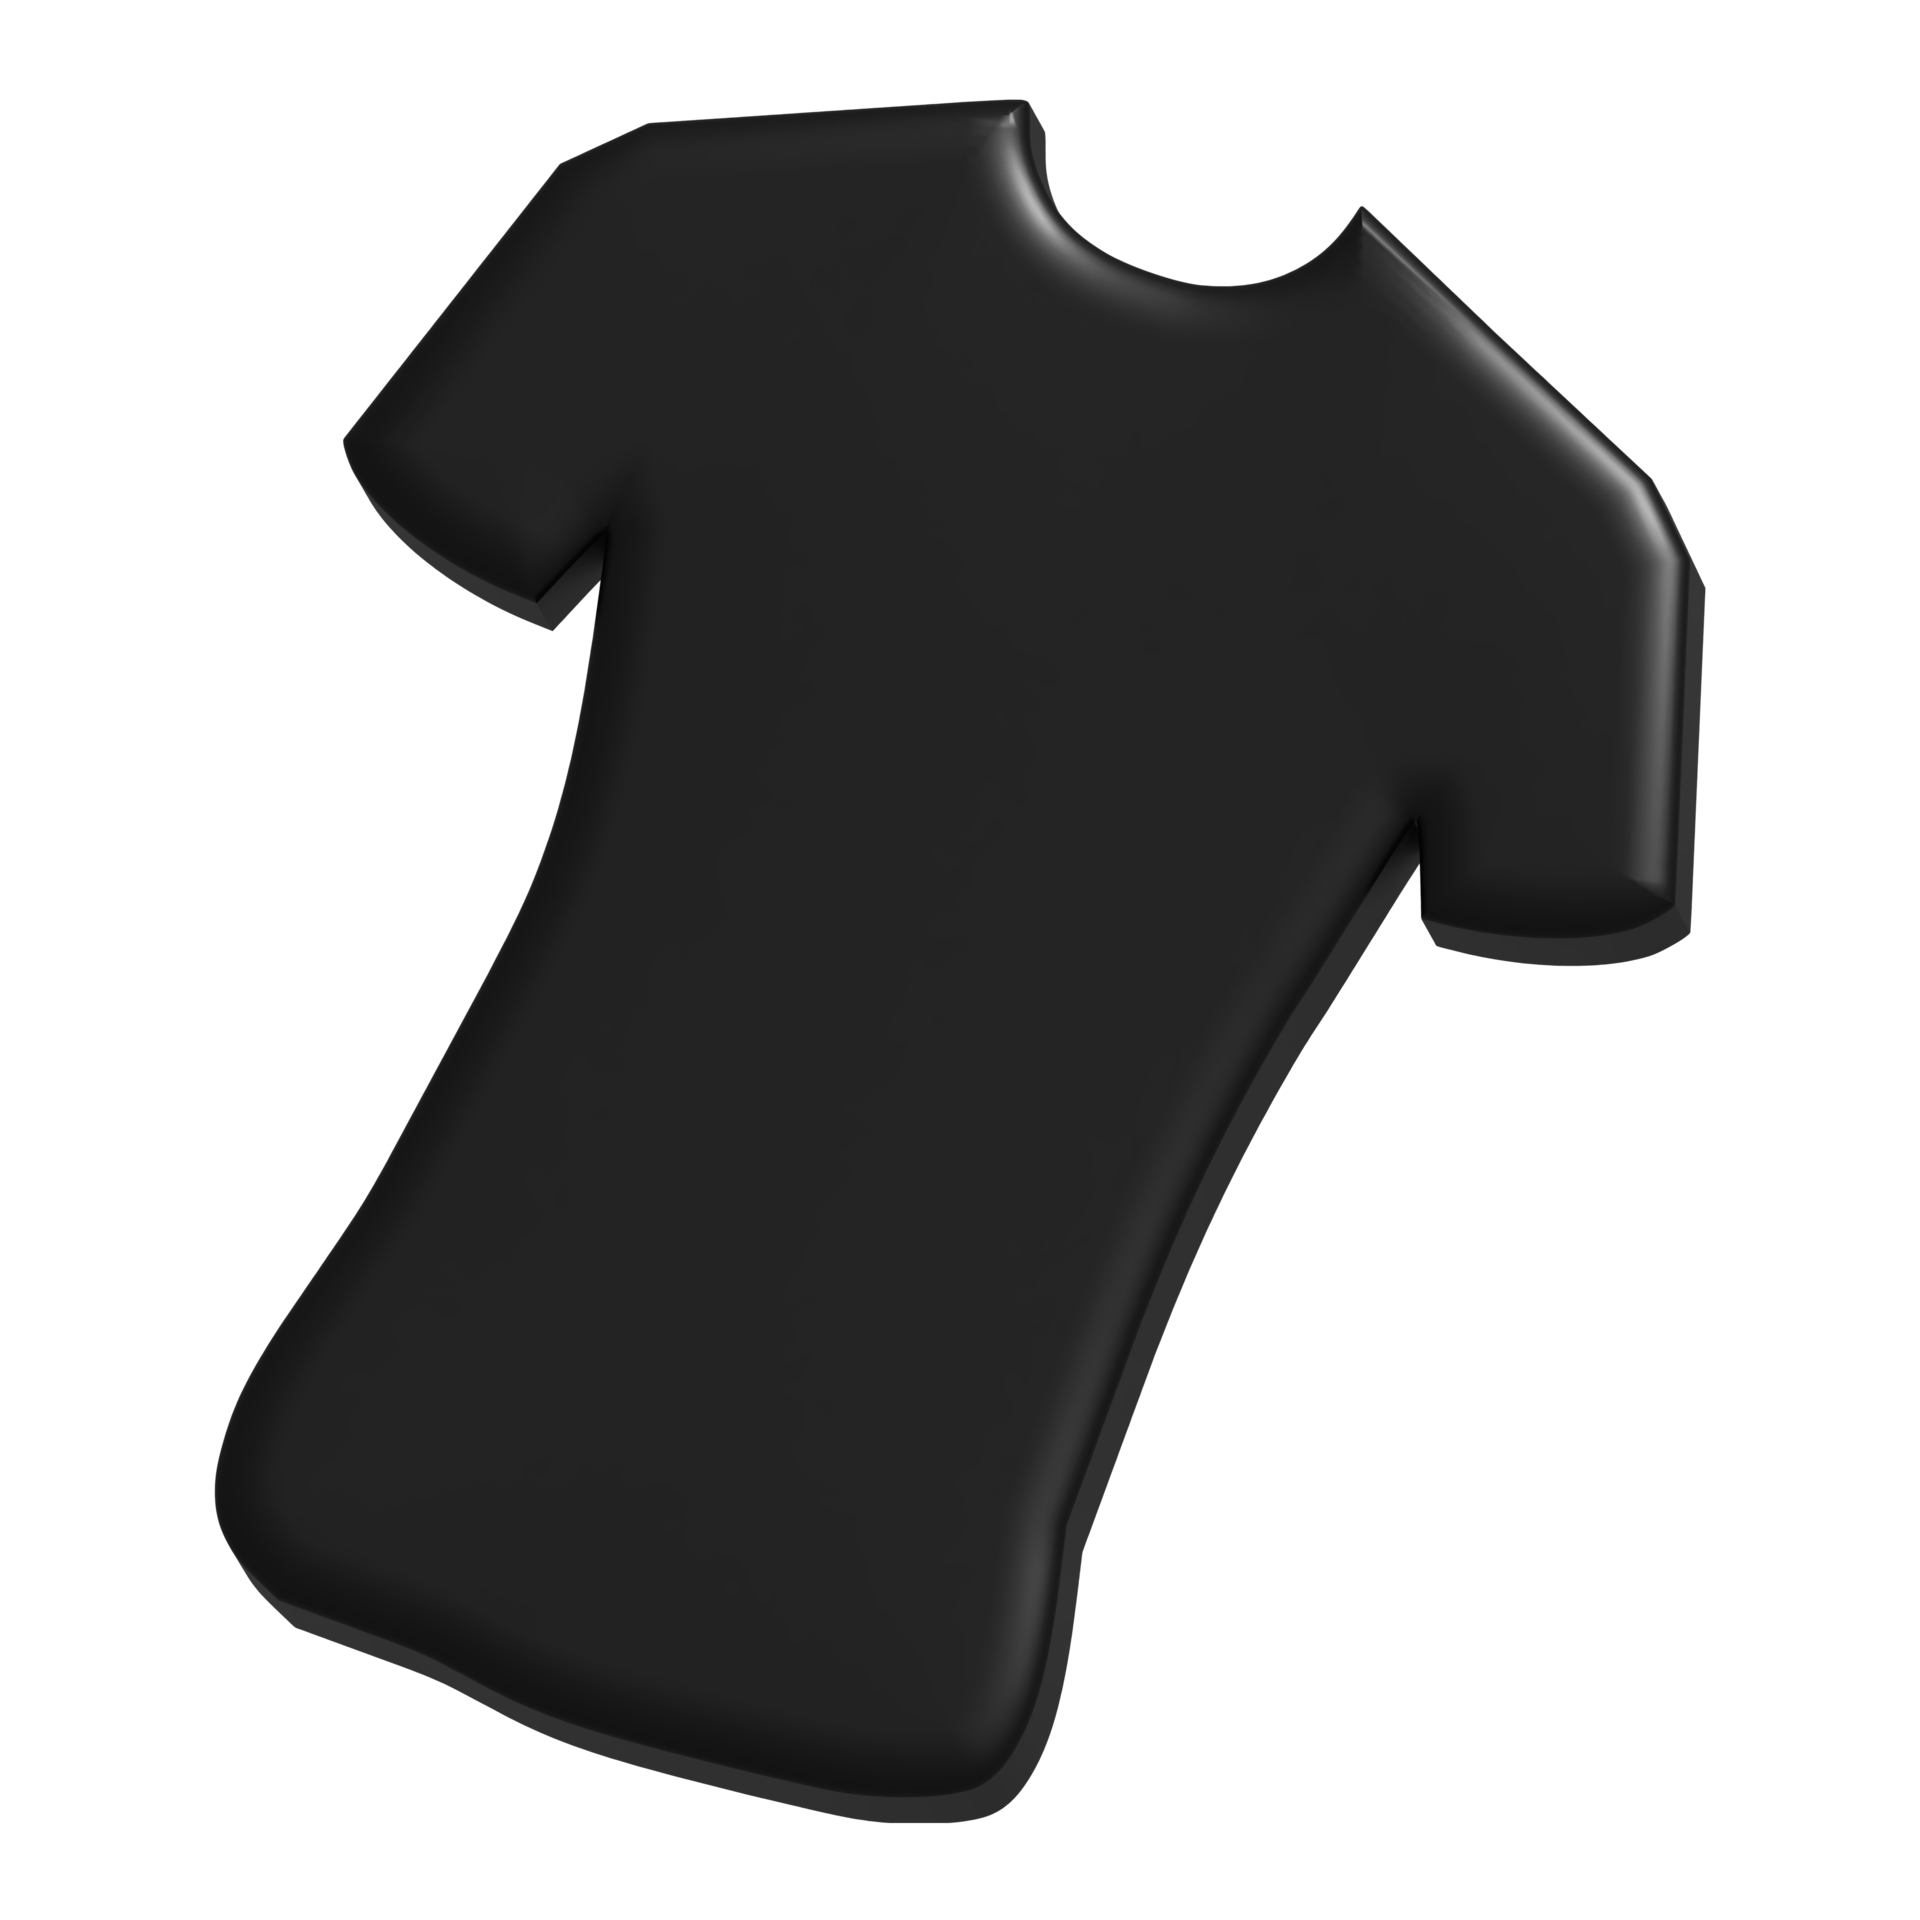 3d icon of t shirt 20033031 PNG